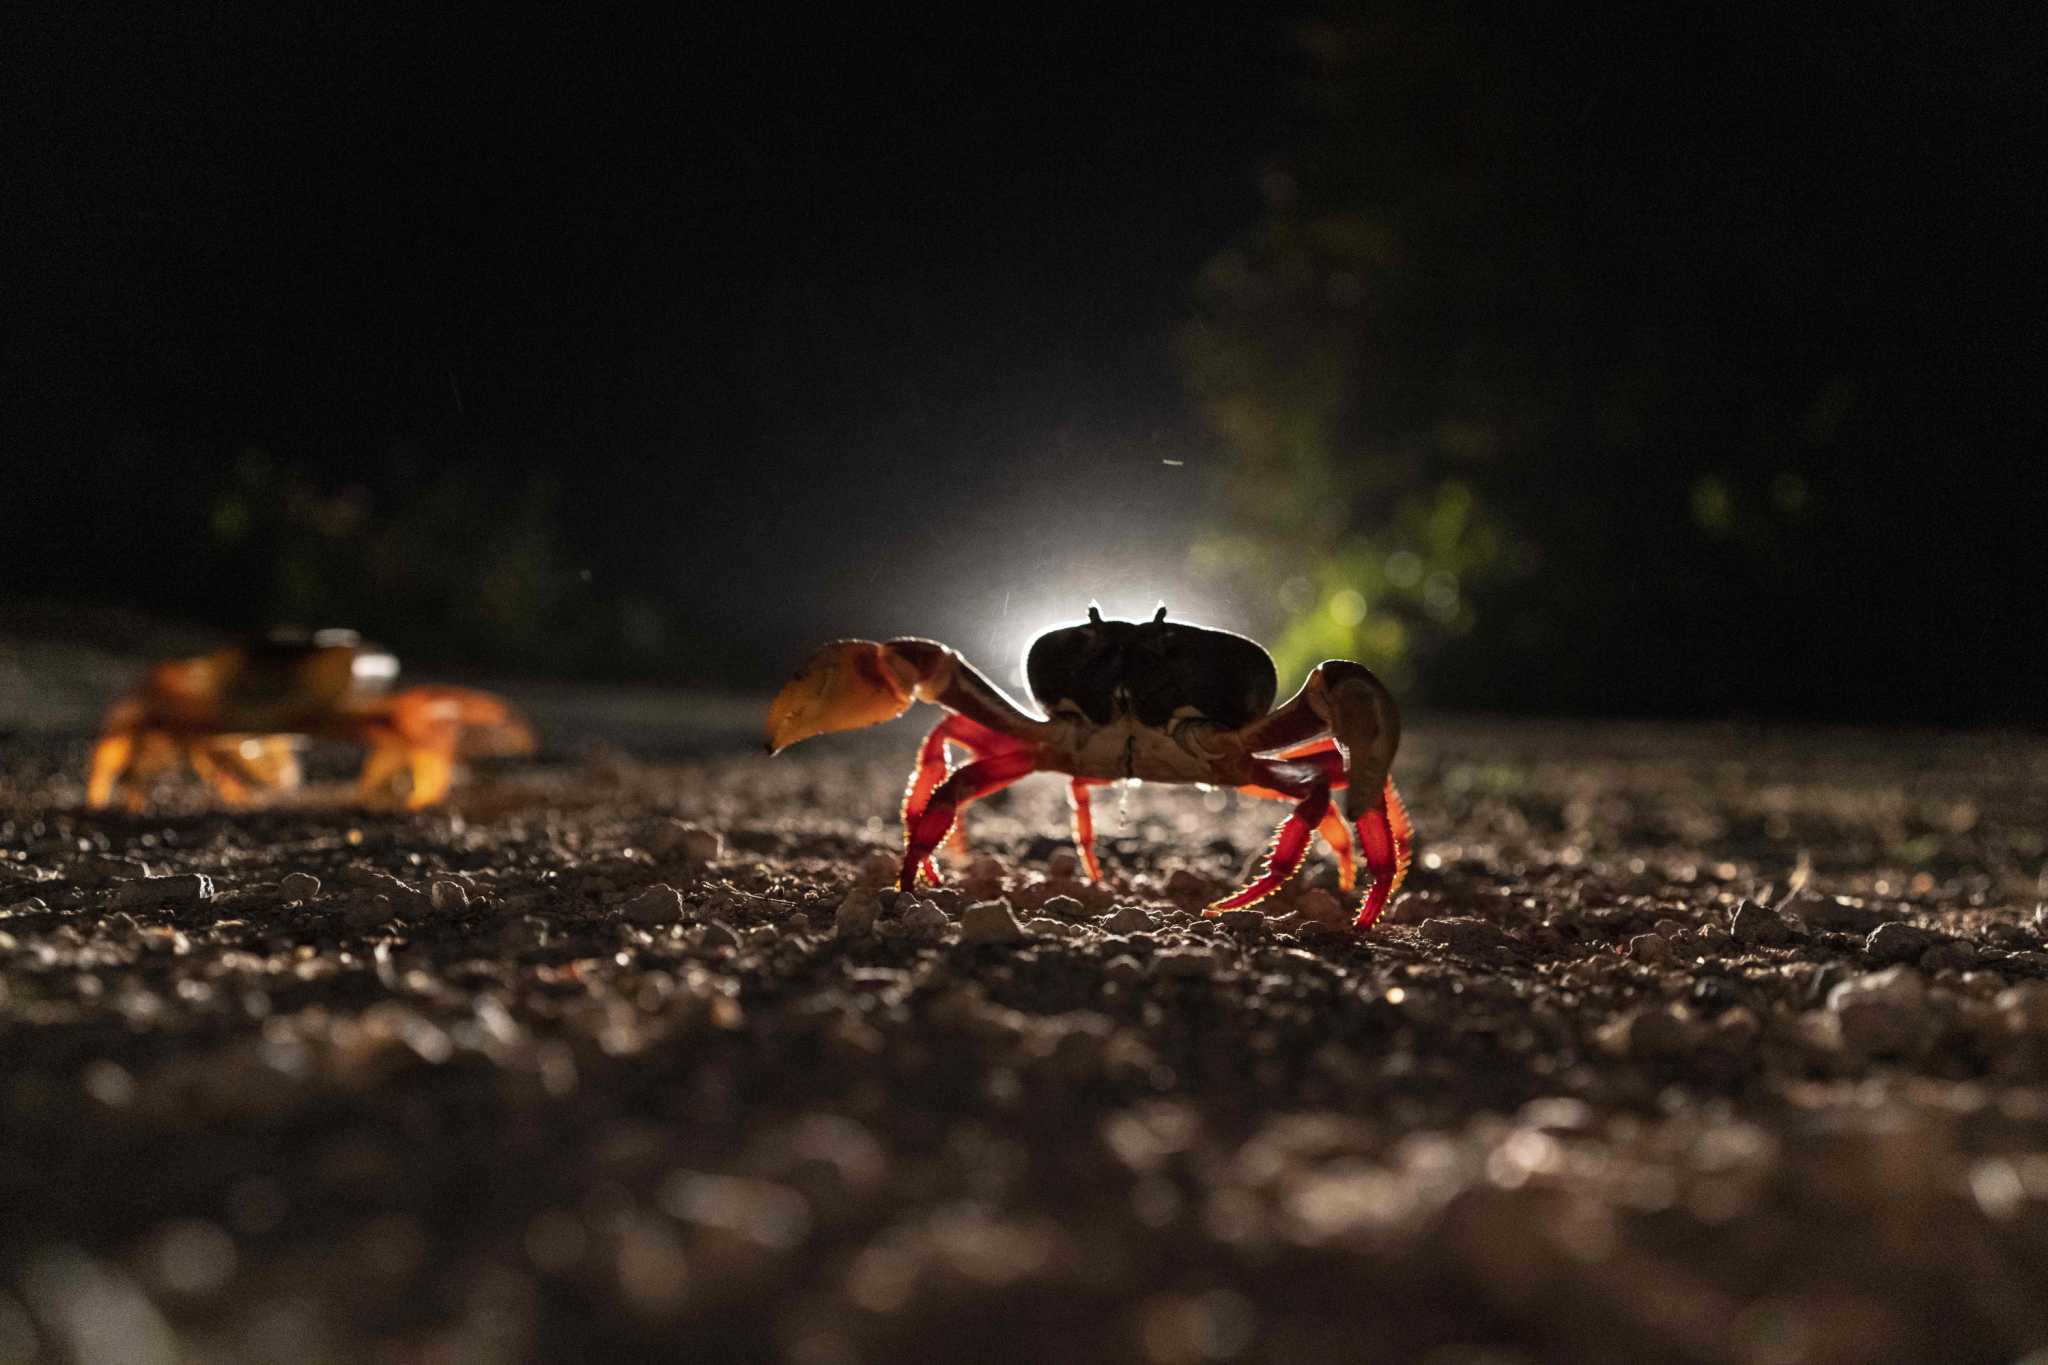 In Cuba, crabs embark on perilous migration to Bay of Pigs